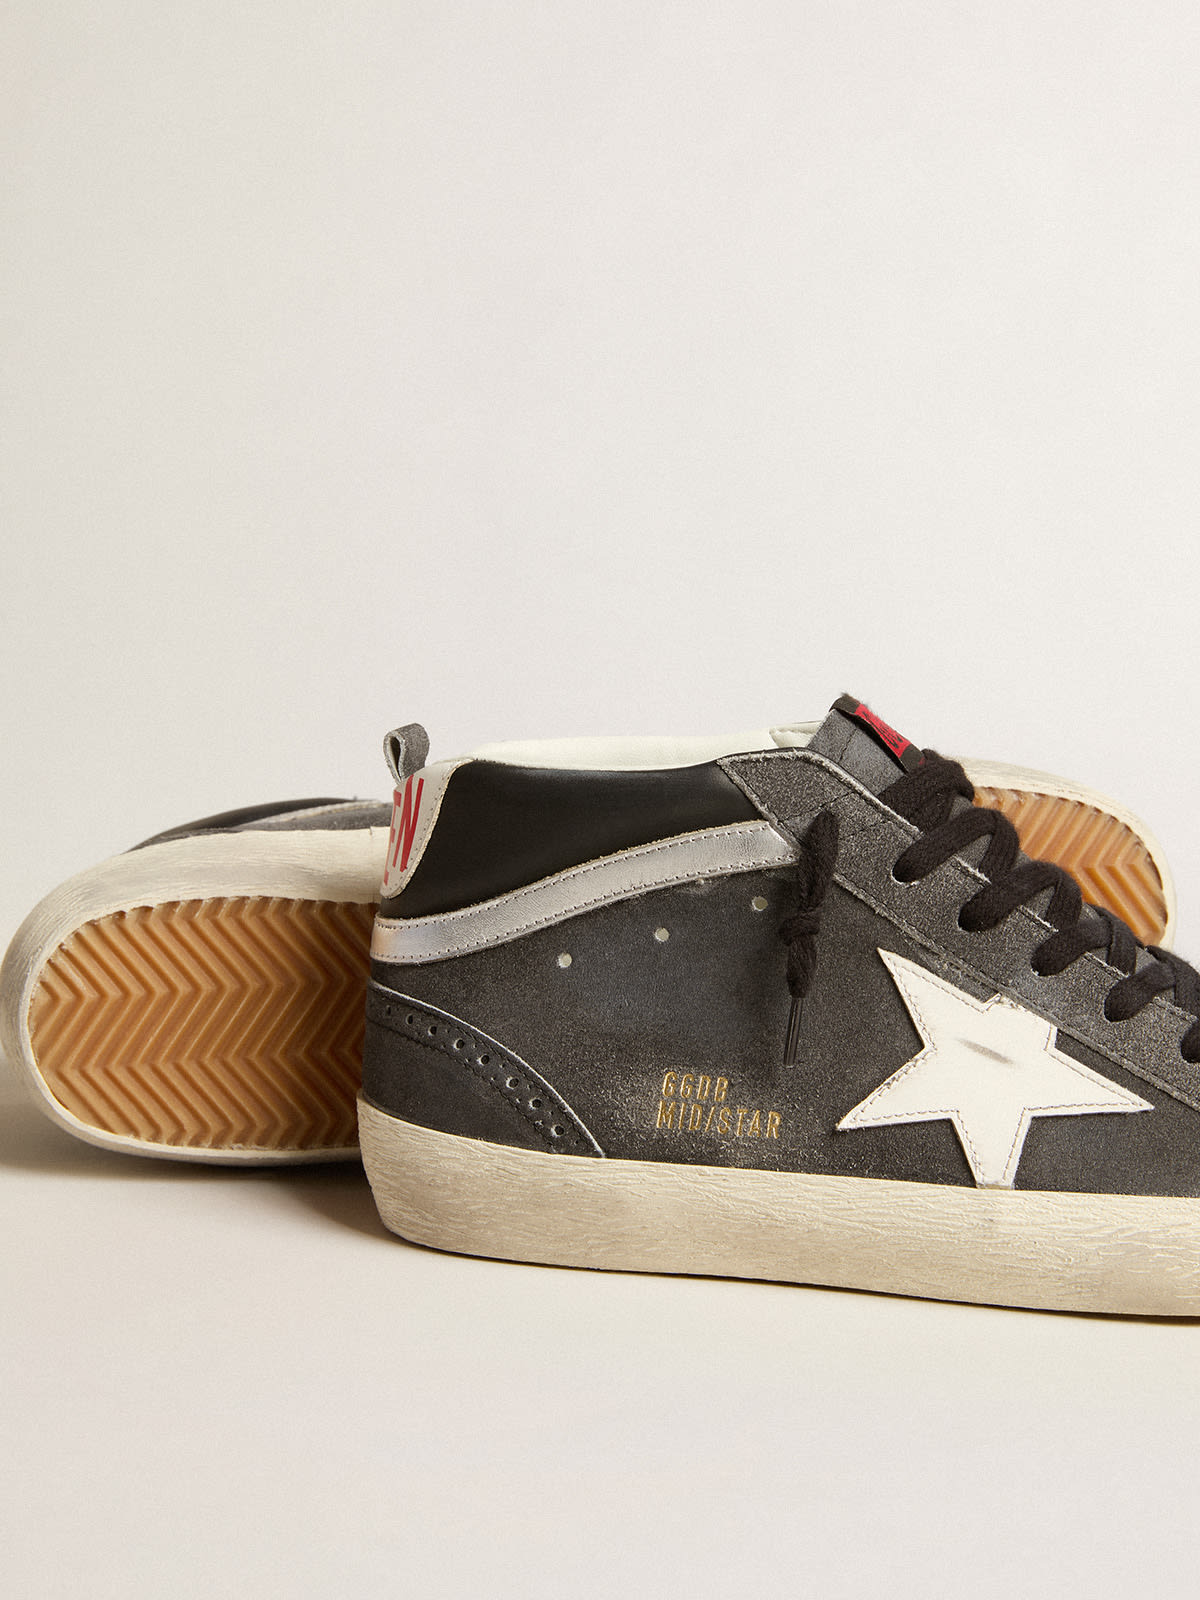 Golden Goose - Mid Star in black suede with white leather star and silver flash in 